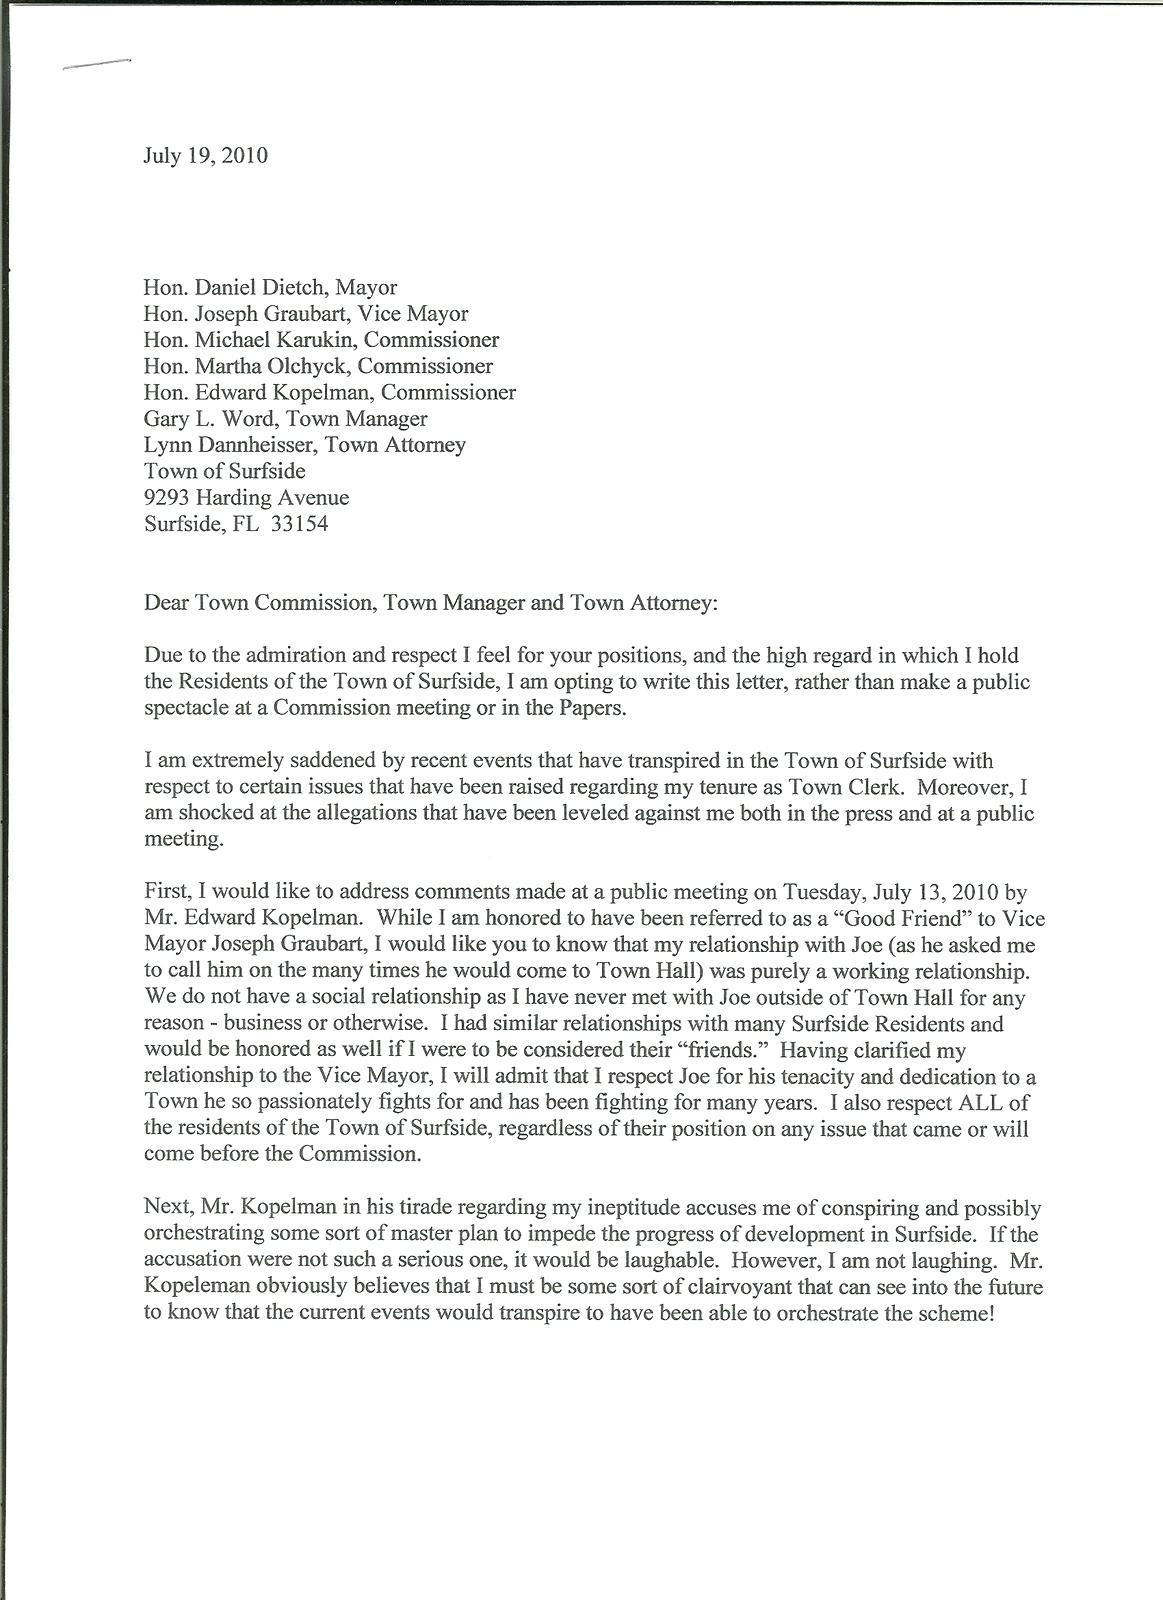 Free Cease And Desist Letter Template For Harassment Examples Letter